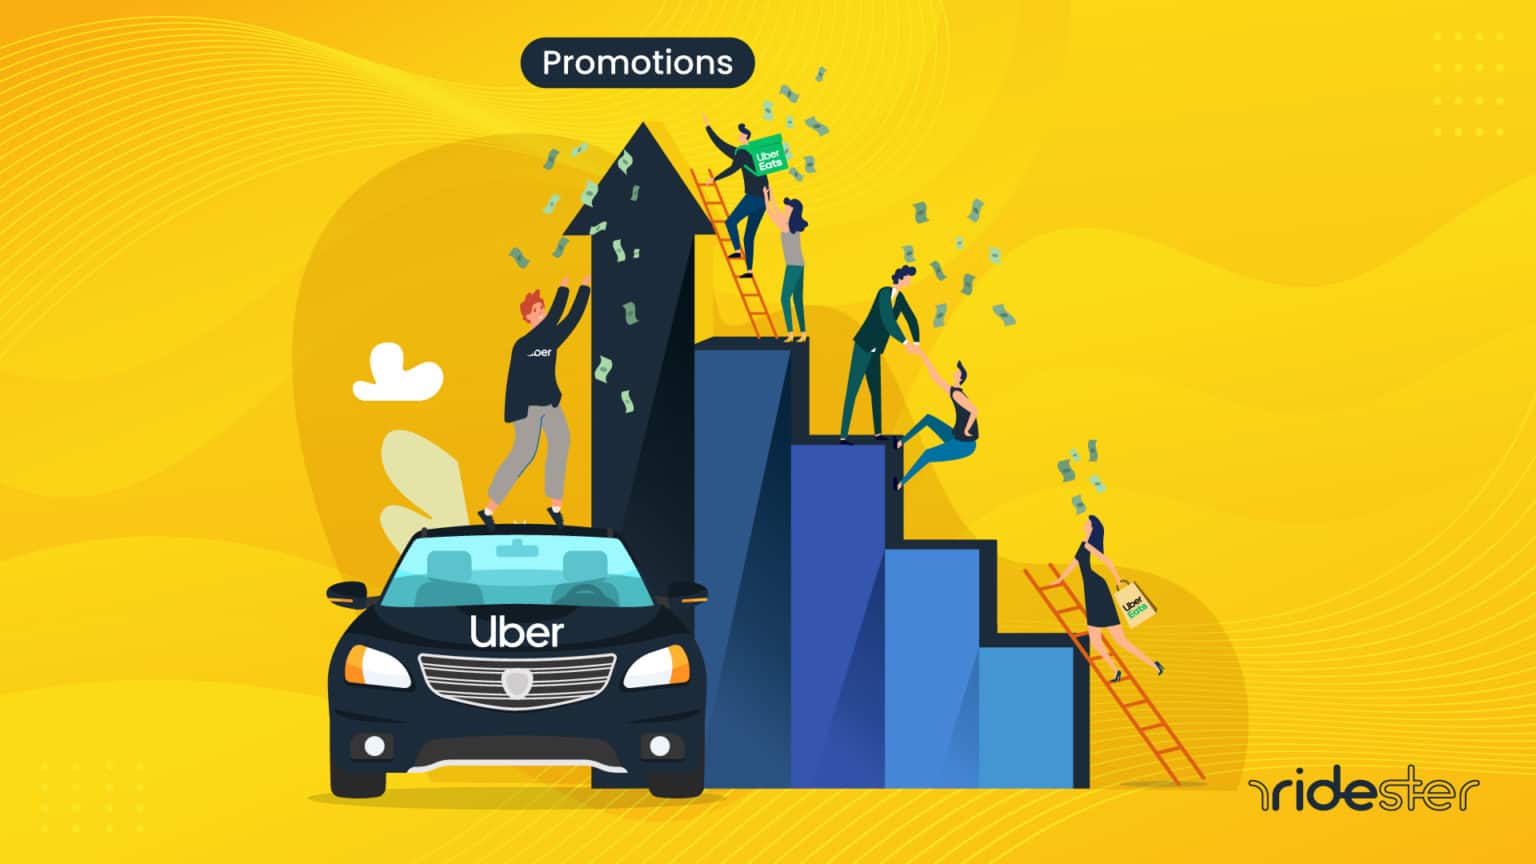 Current Uber Promotions for Riders and Drivers in 2022